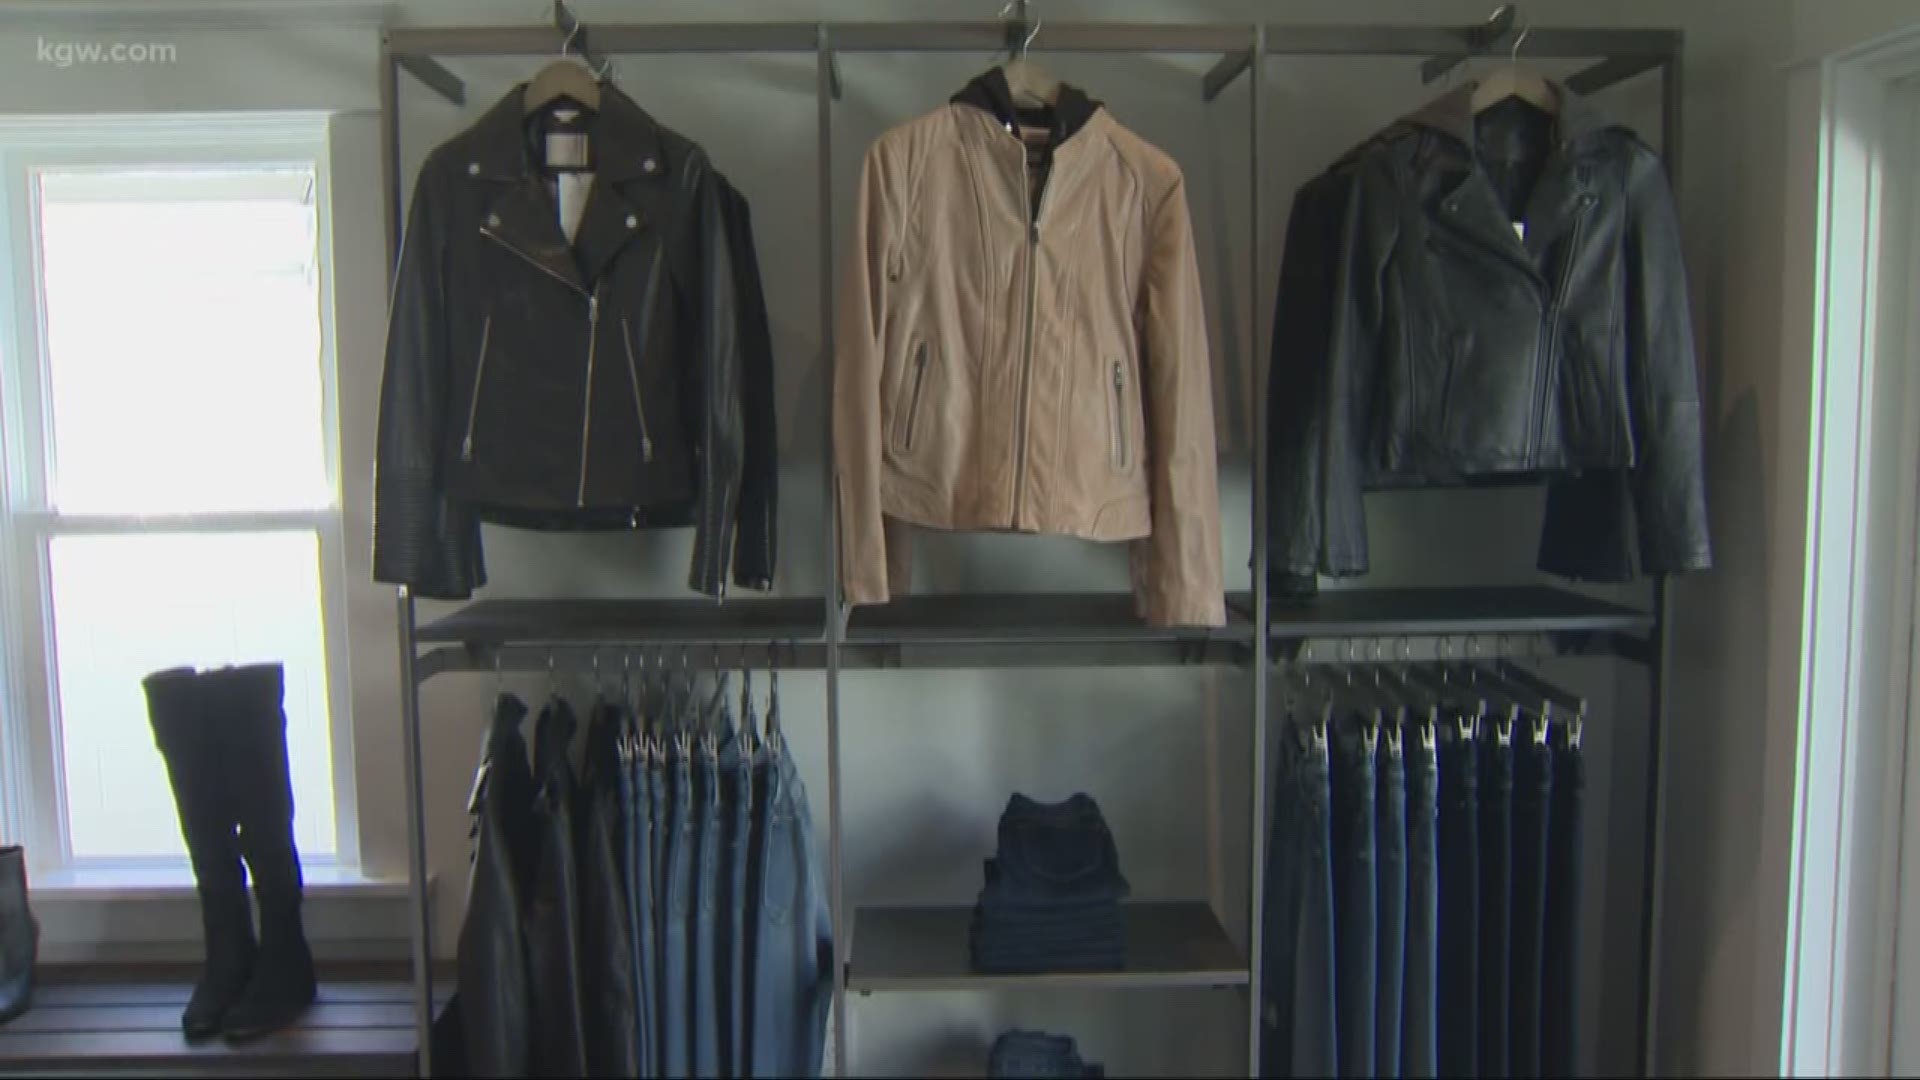 Clothing store gives profits to charity